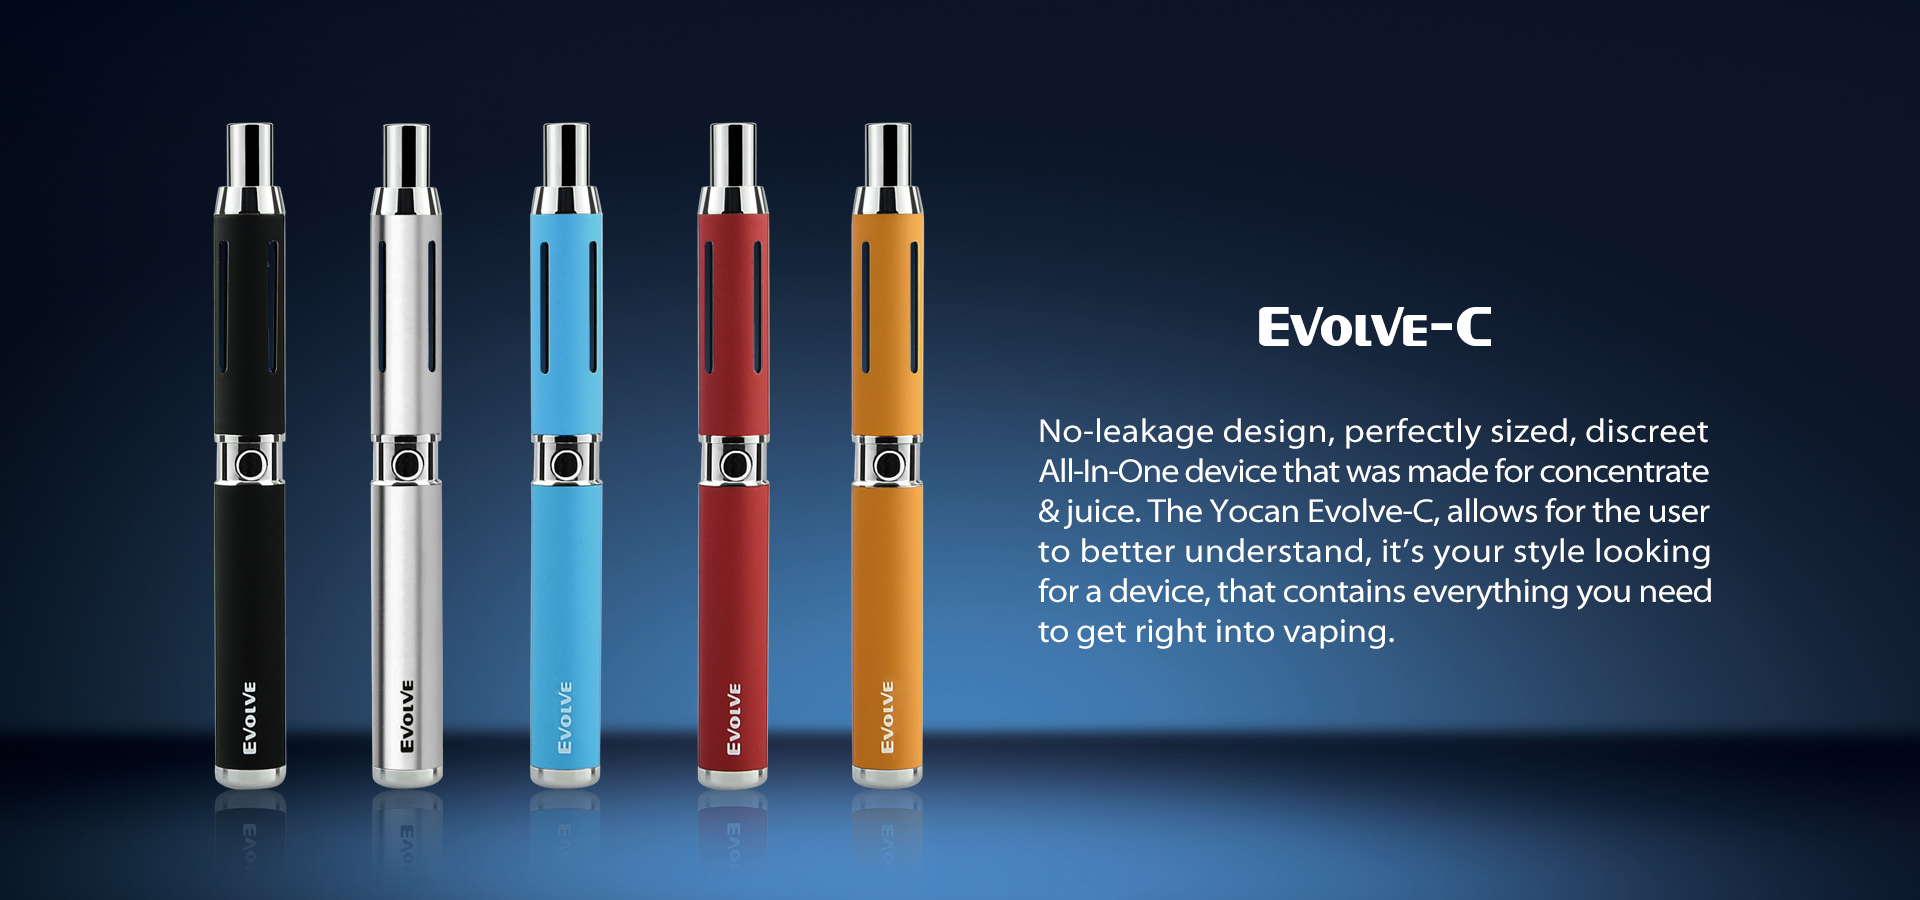 The Yocan Evolve C is a pen-style vaporizer designed for use with both waxes and oils.